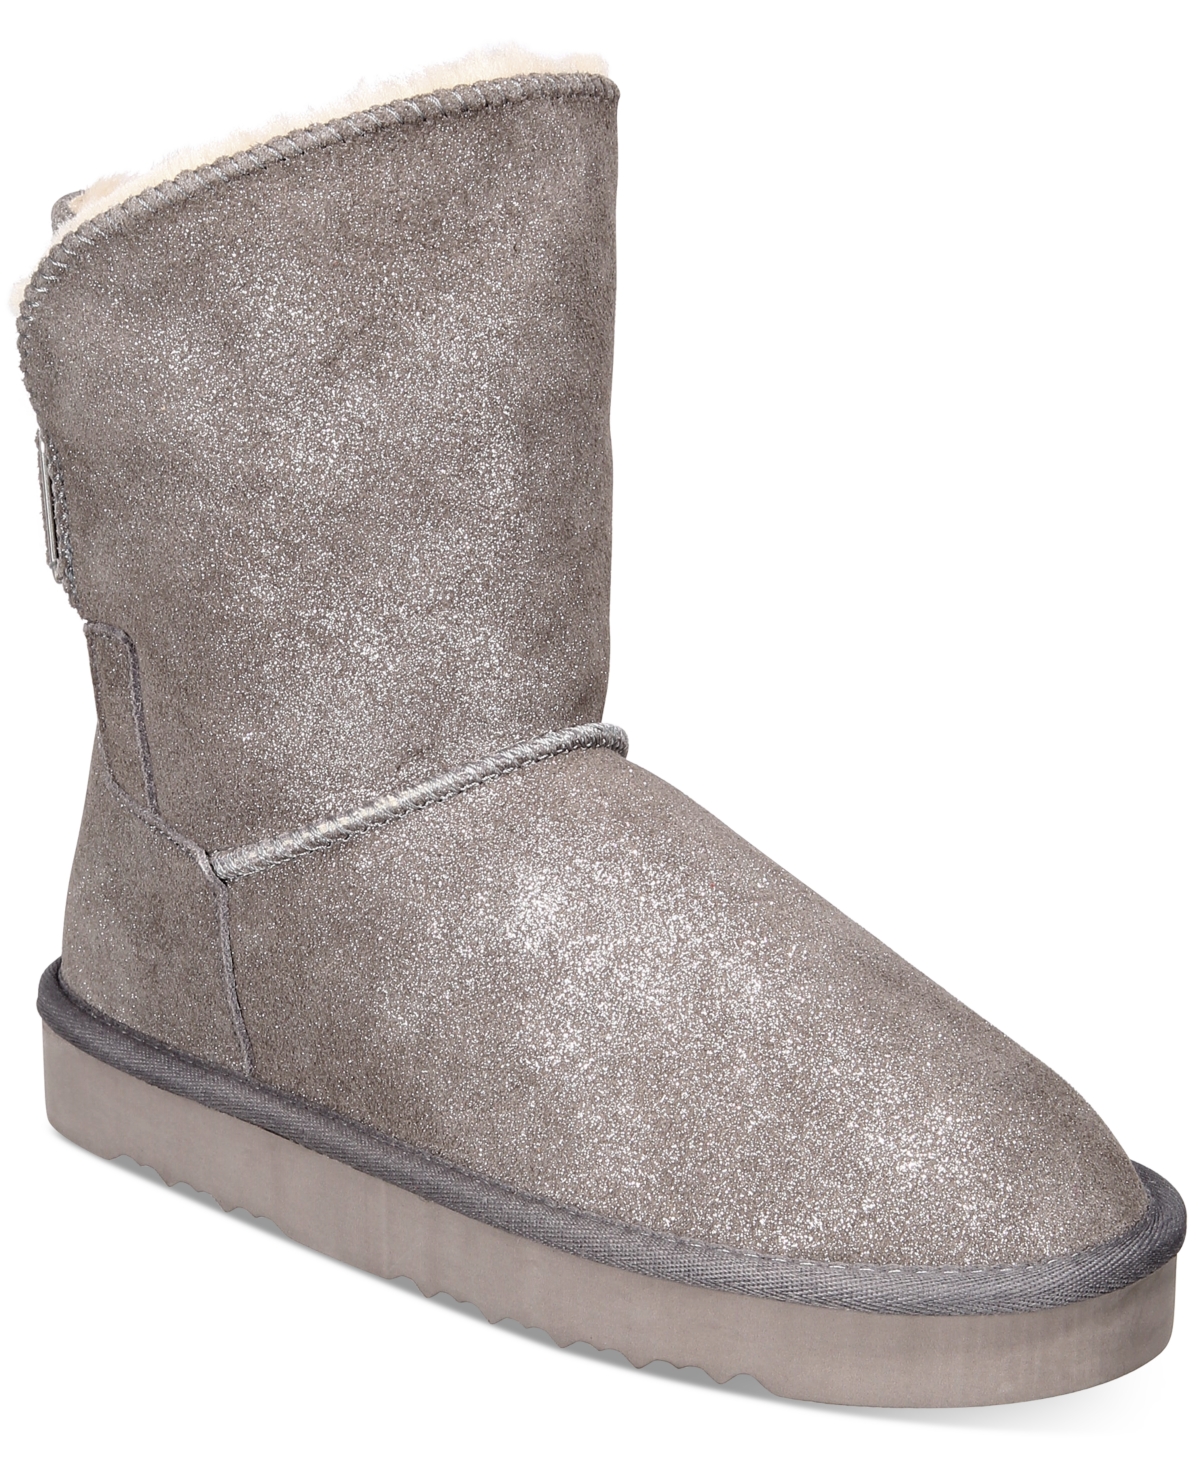 Teenyy Cold-Weather Booties, Created for Macy's - Pewter Shimmer